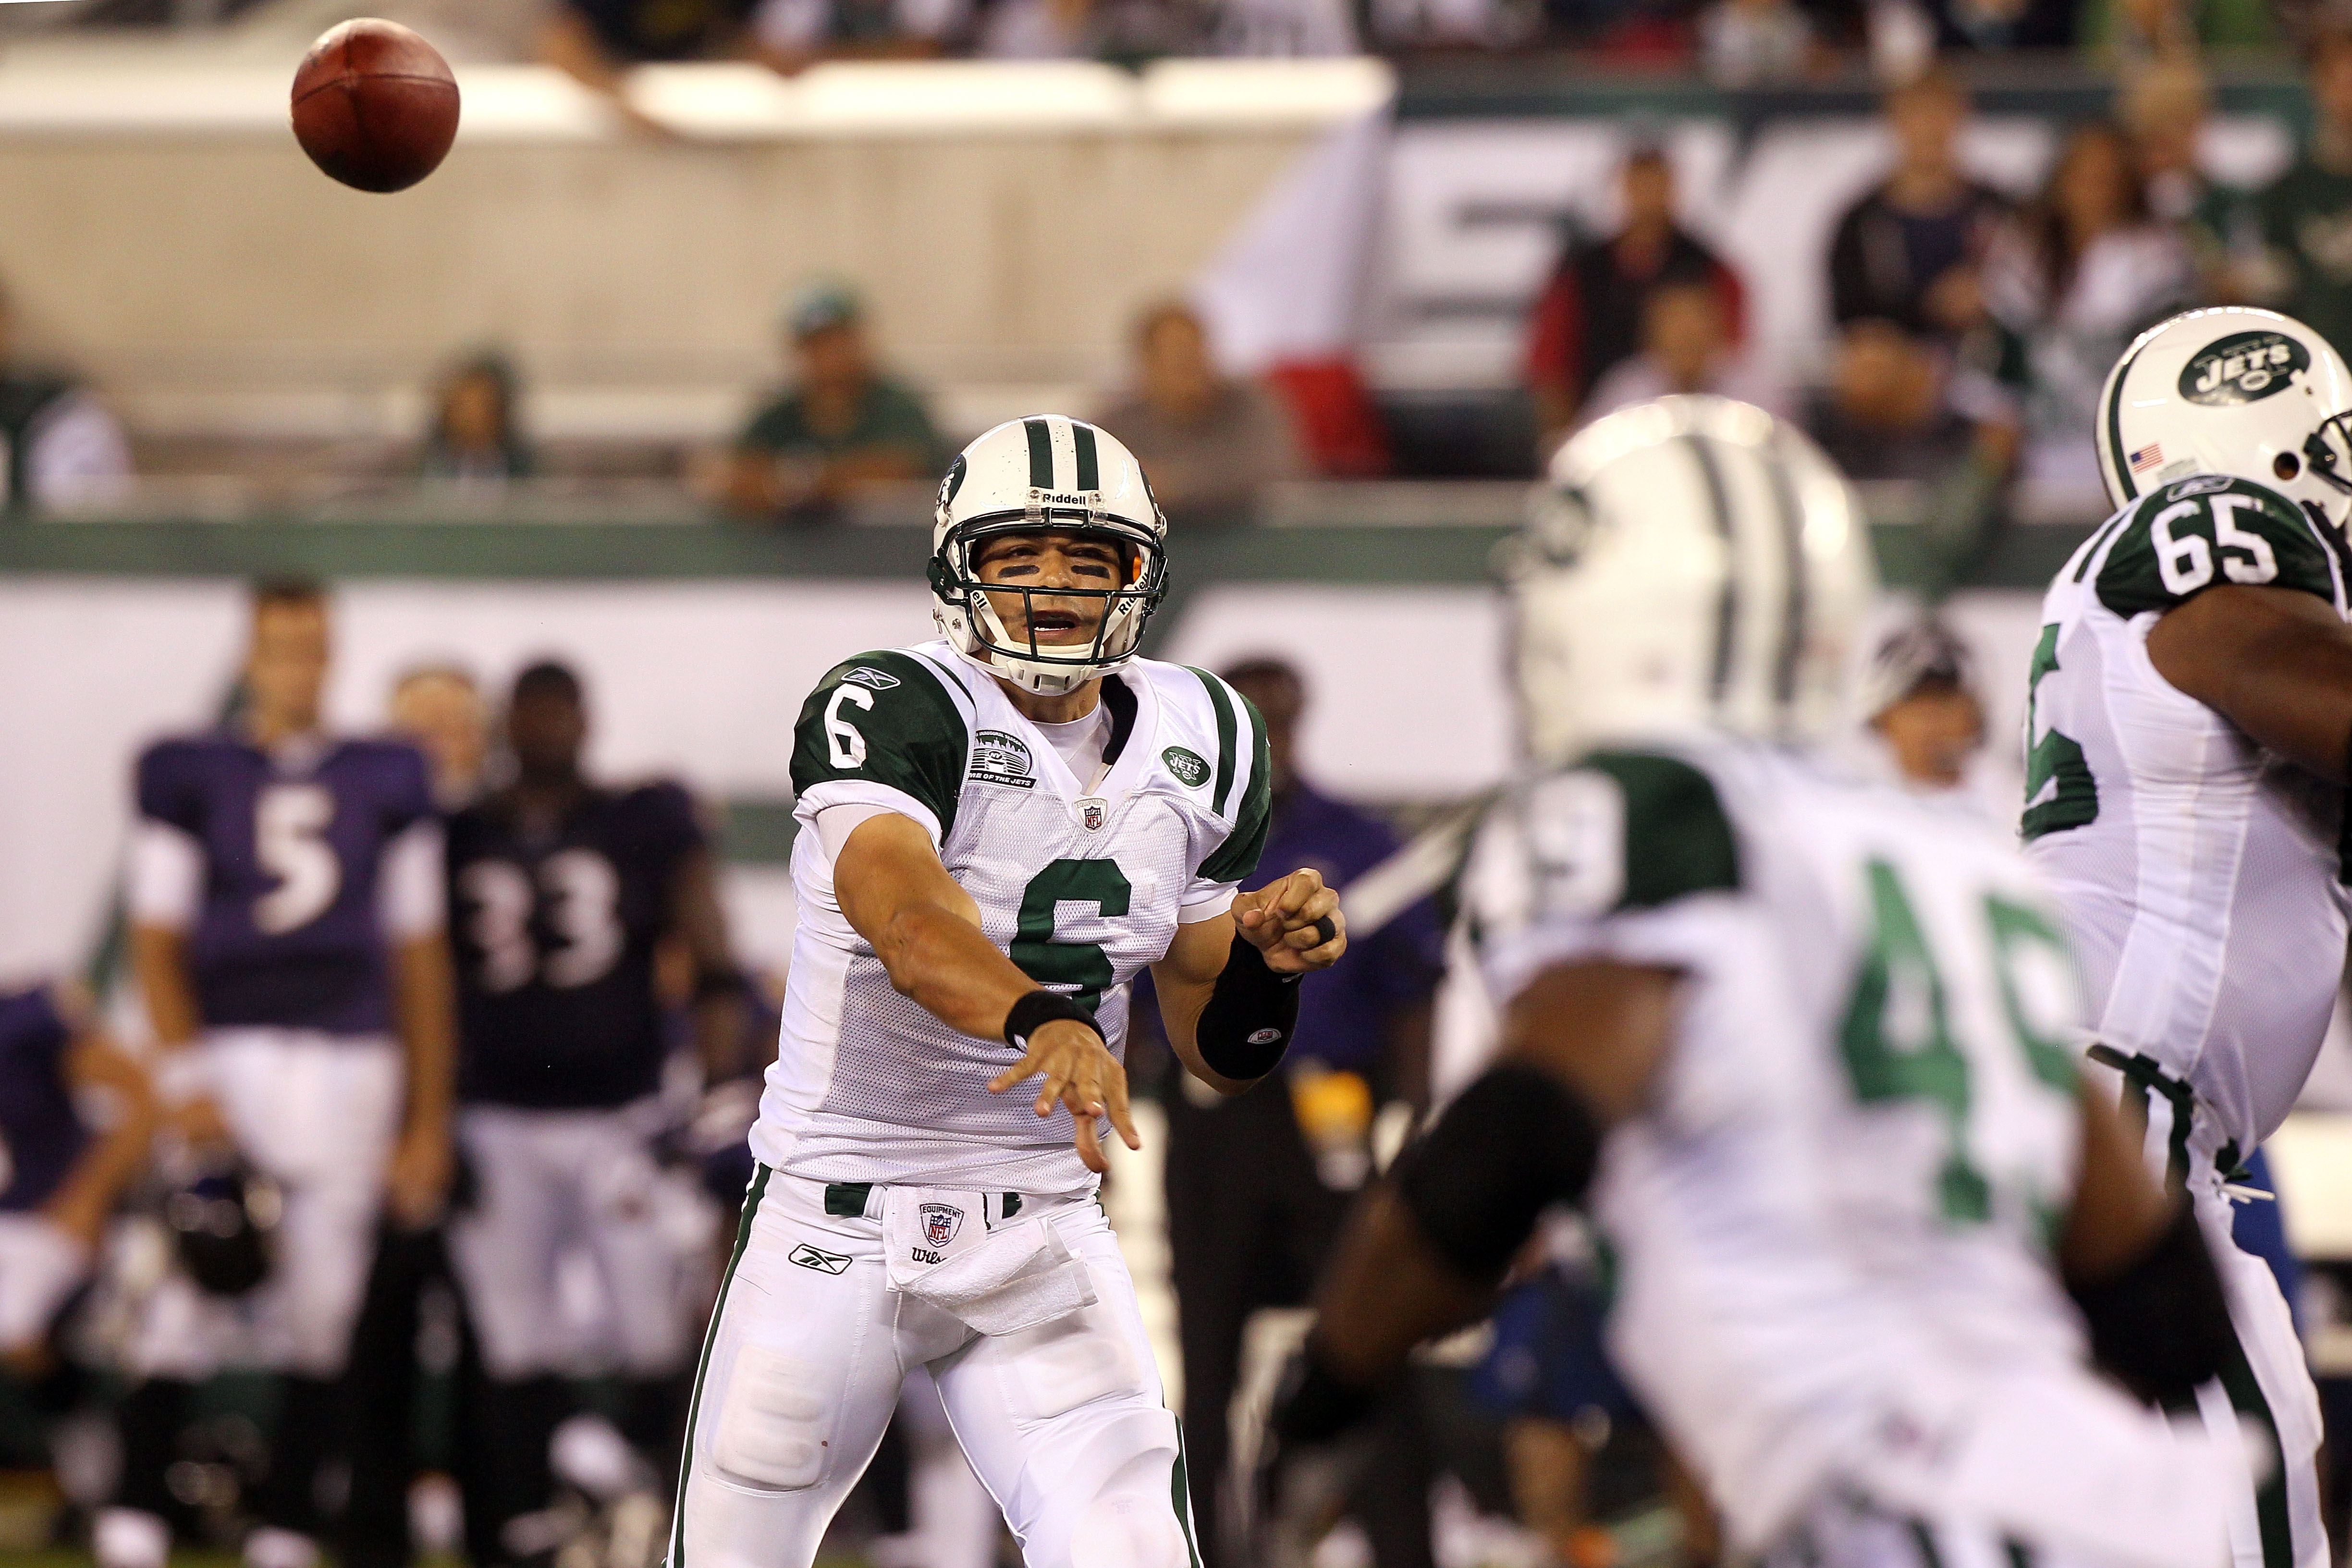 Mark Sanchez is the leader of a Jets' offense that continues to win games as they sit atop the AFC East